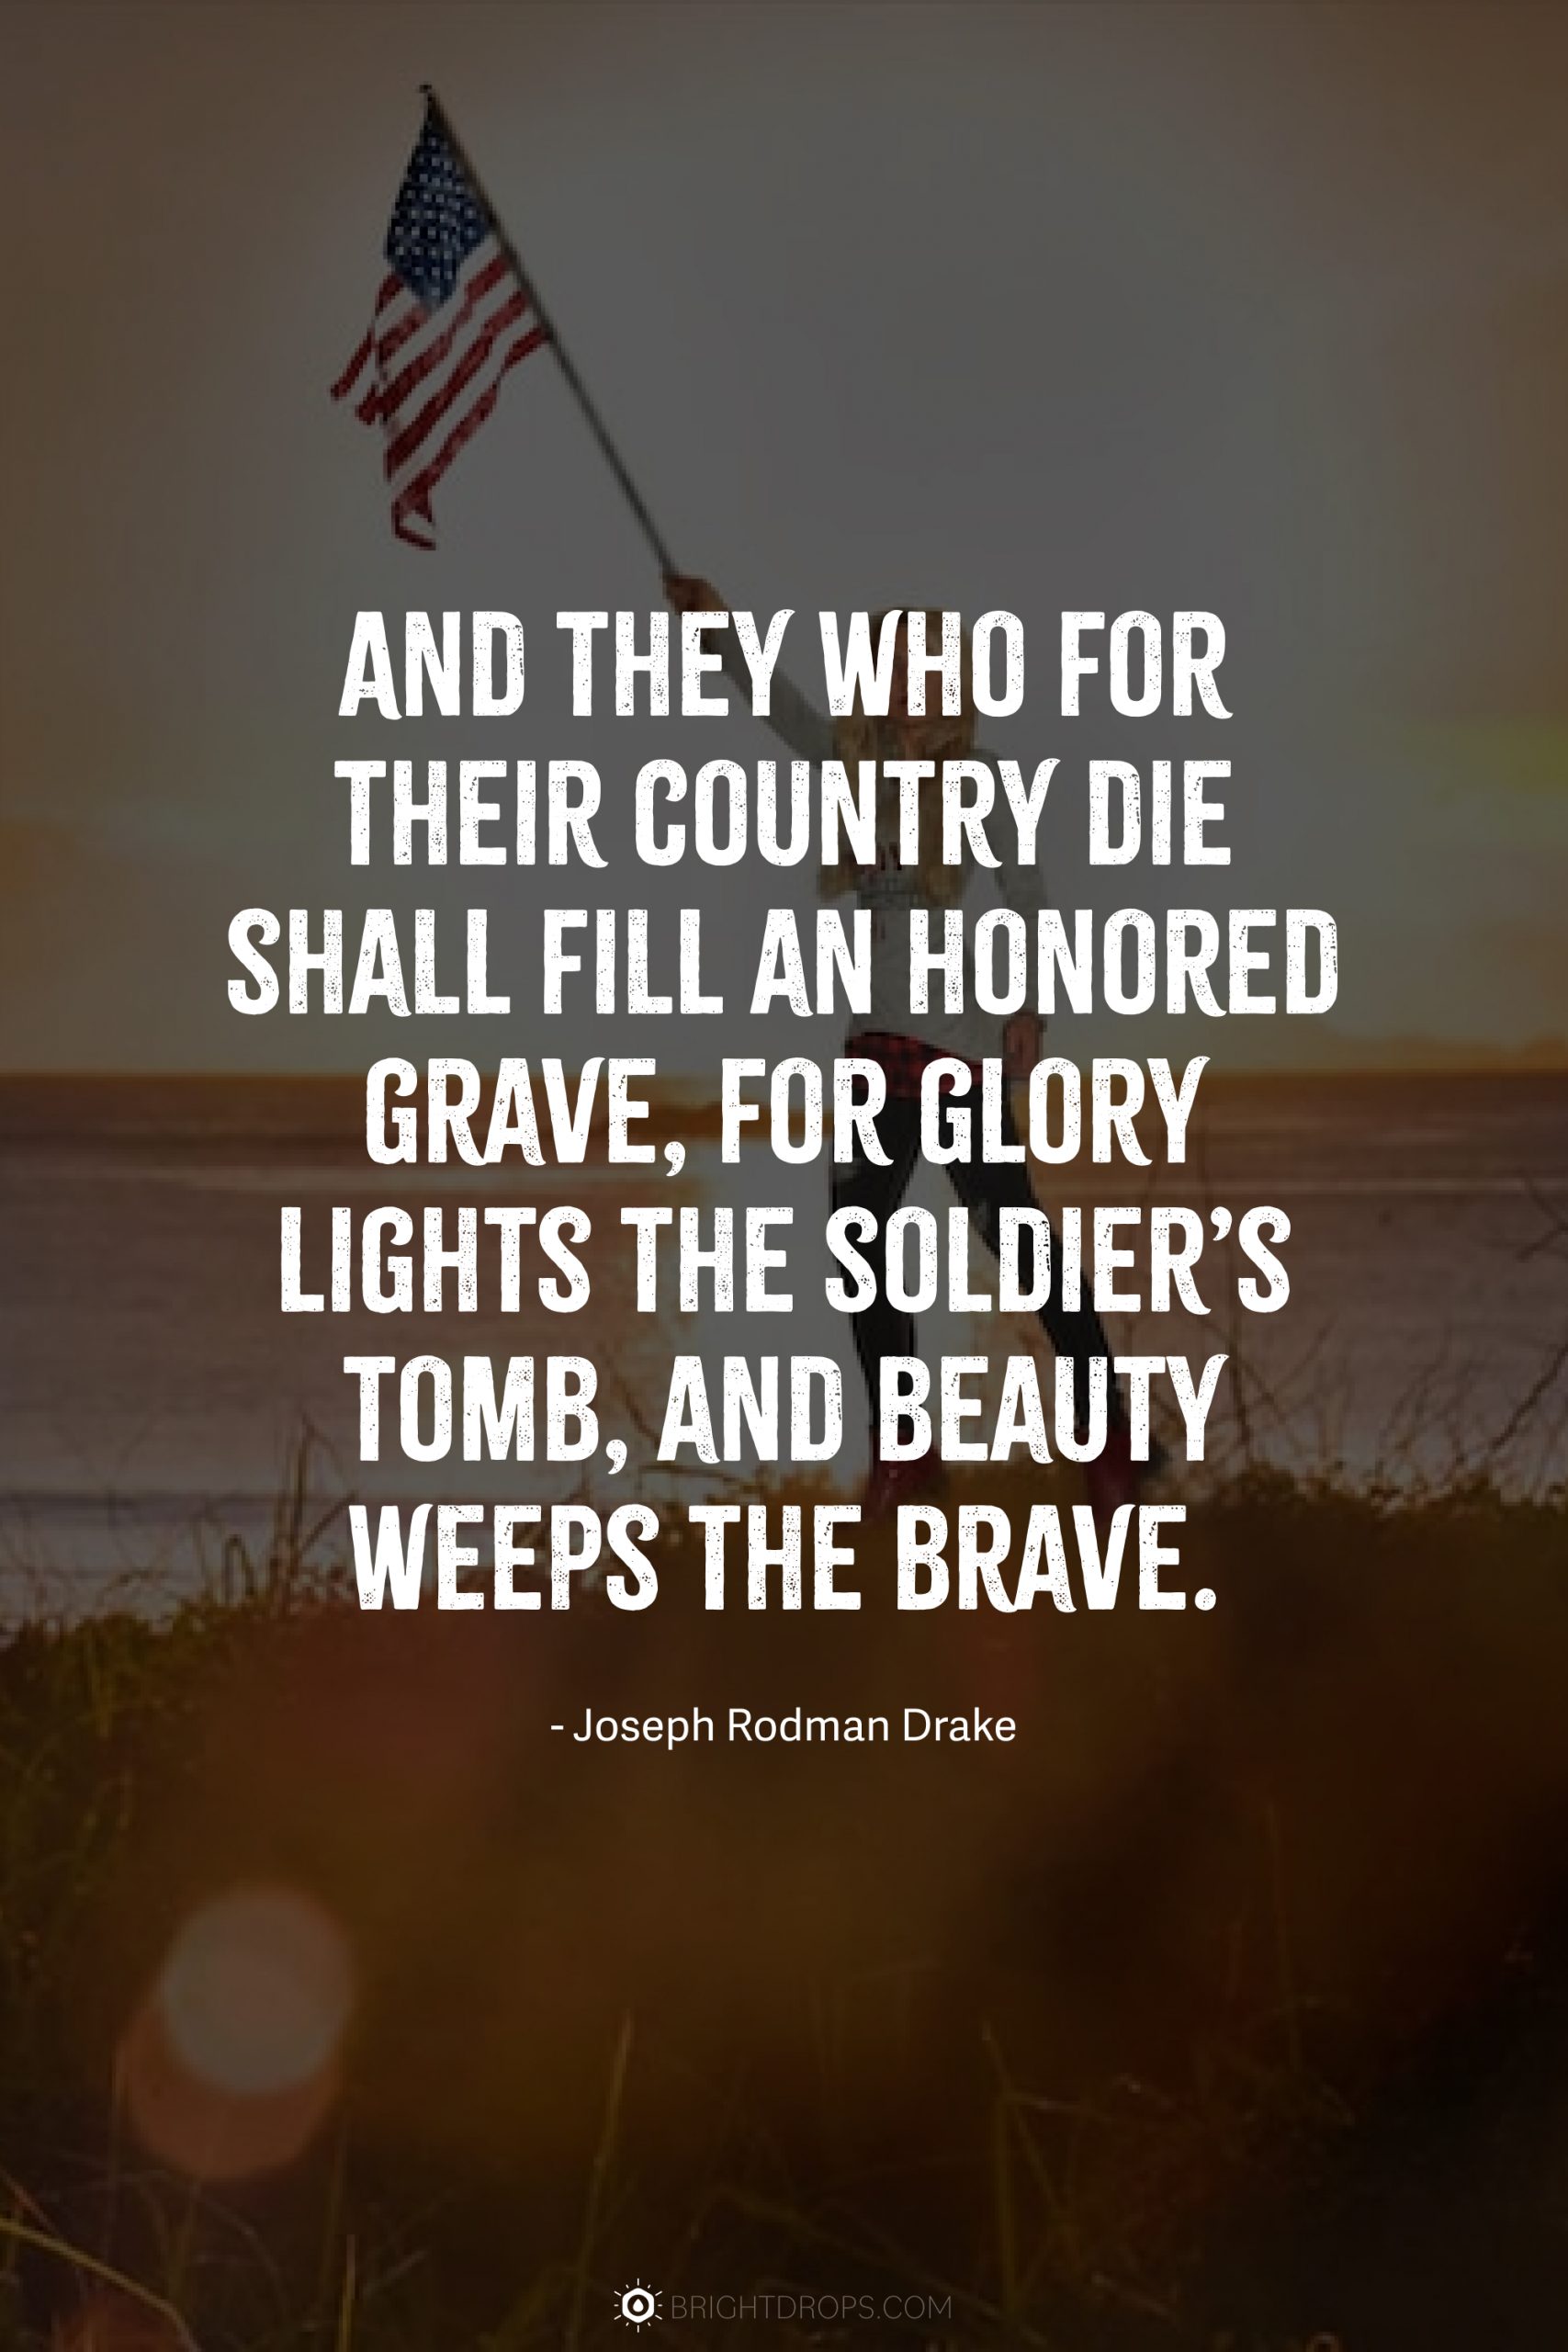 And they who for their country die shall fill an honored grave, for glory lights the soldier’s tomb, and beauty weeps the brave.